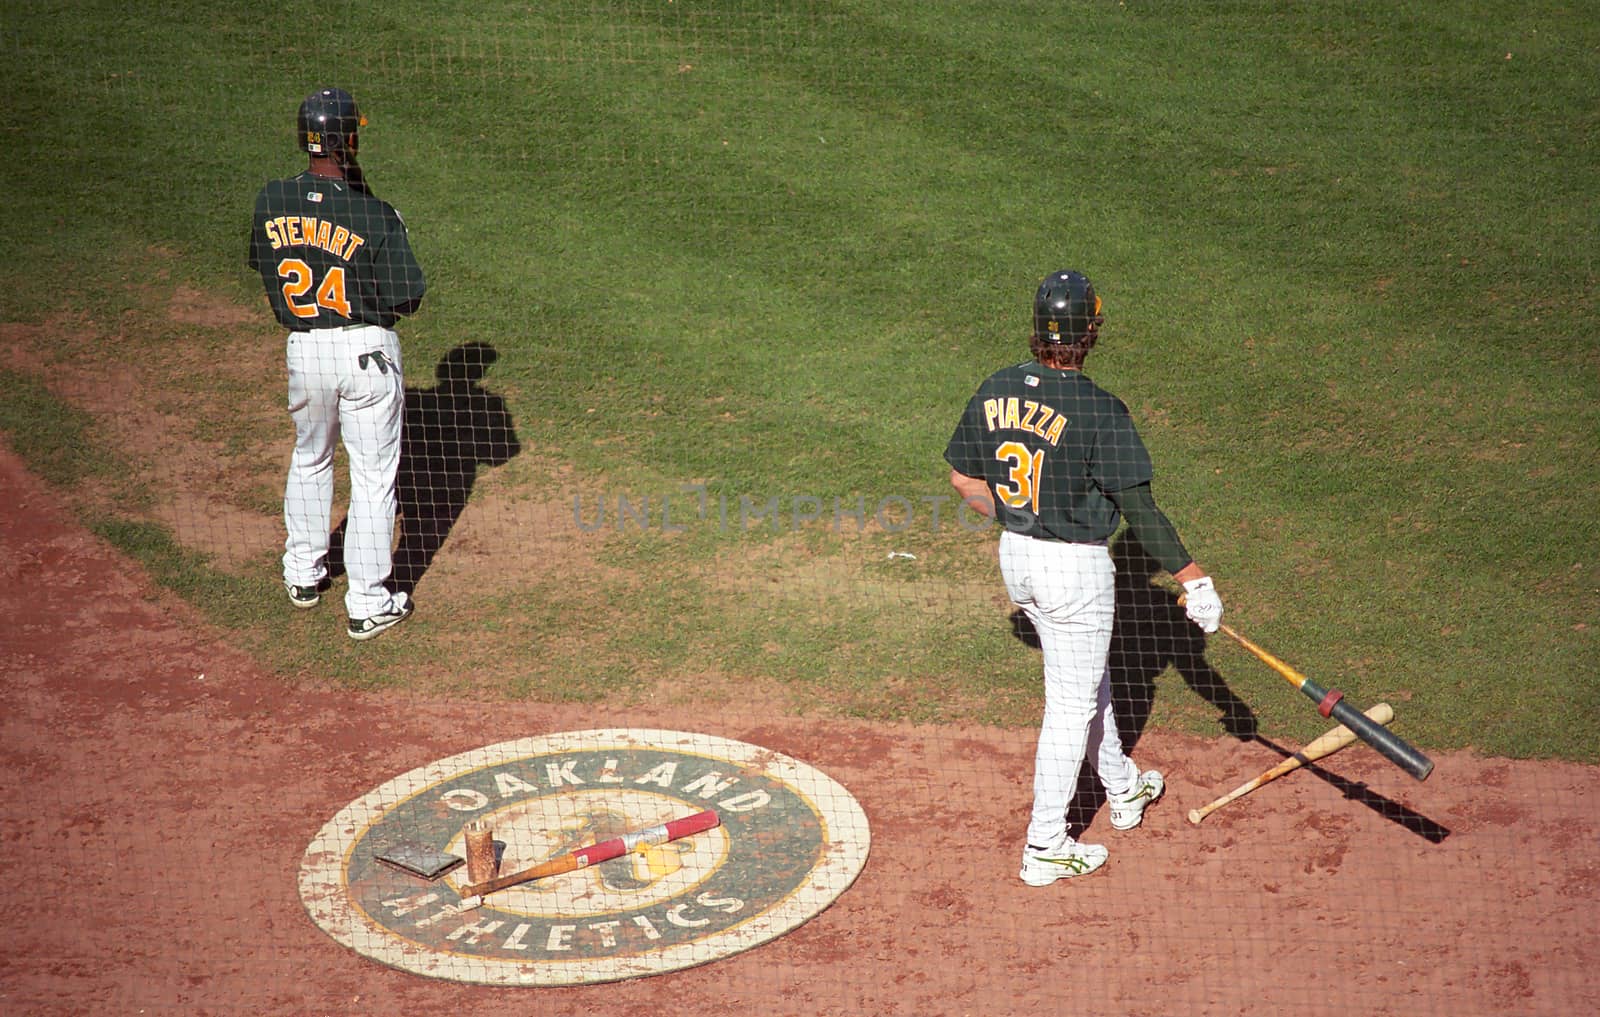 Oakland-Alameda County O.co Coliseum - A's by Ffooter